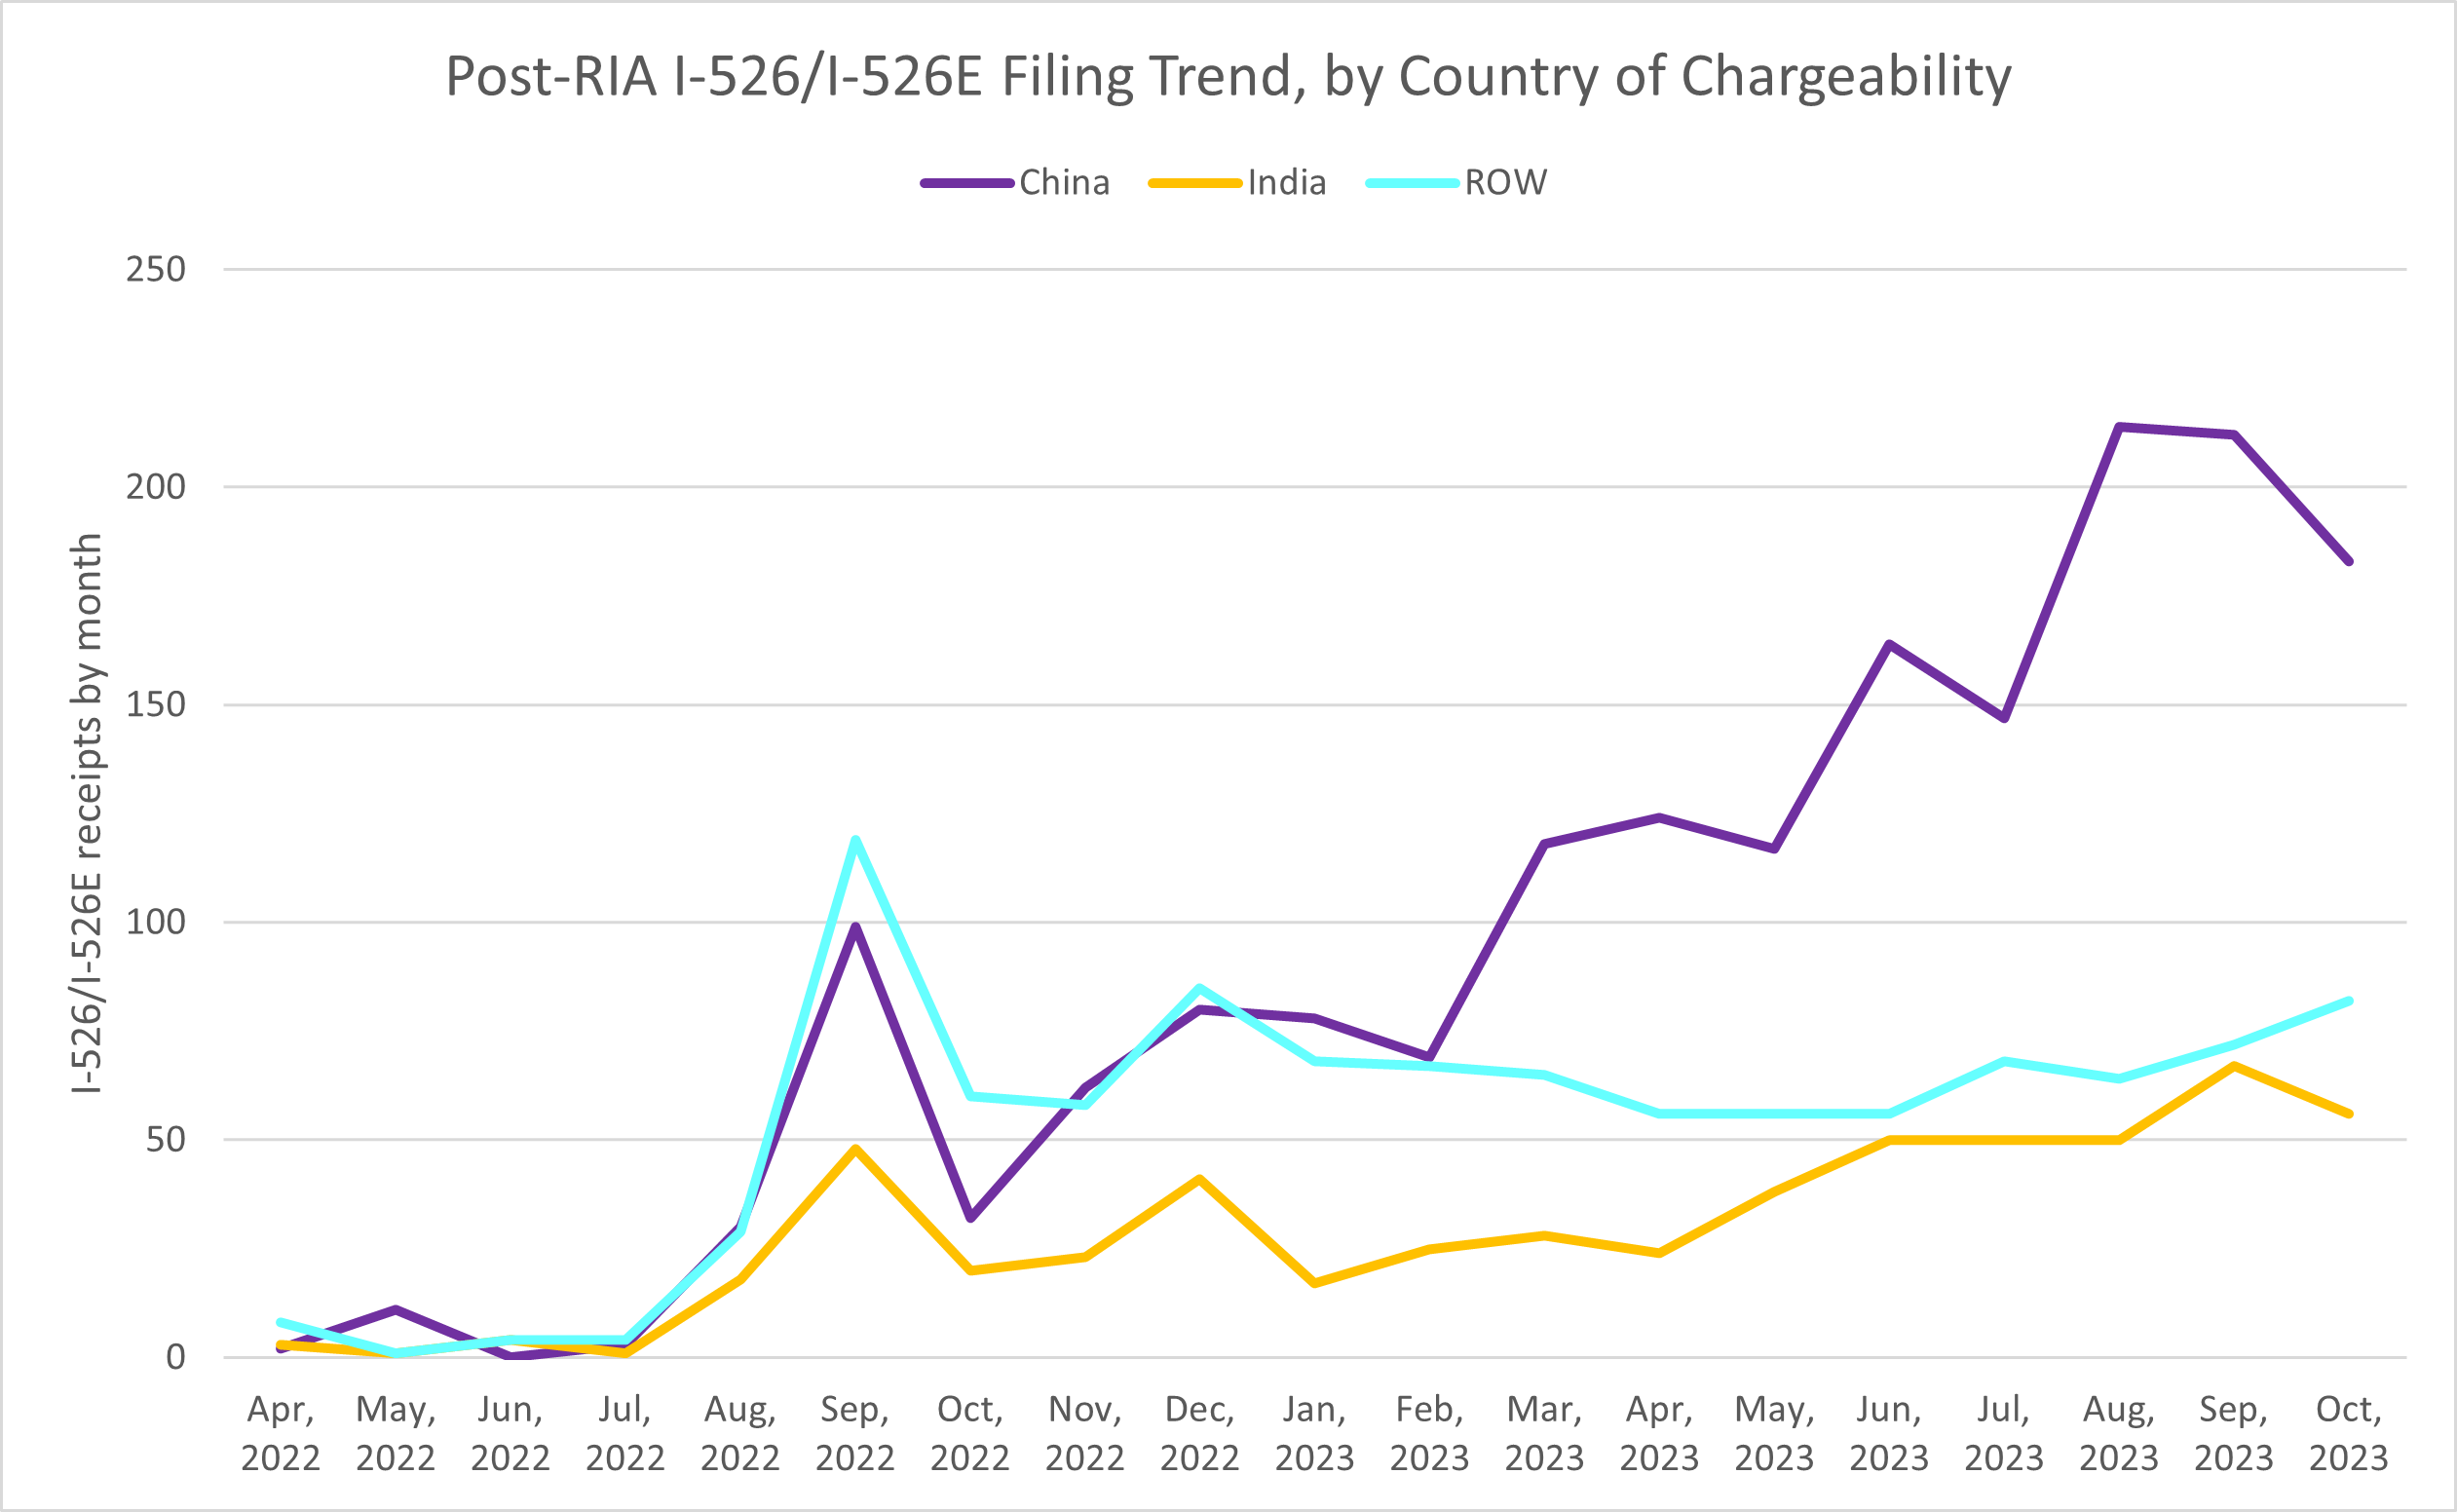 Post-RIA I-526/I-526E Filing Trend, by Country of Chargeability